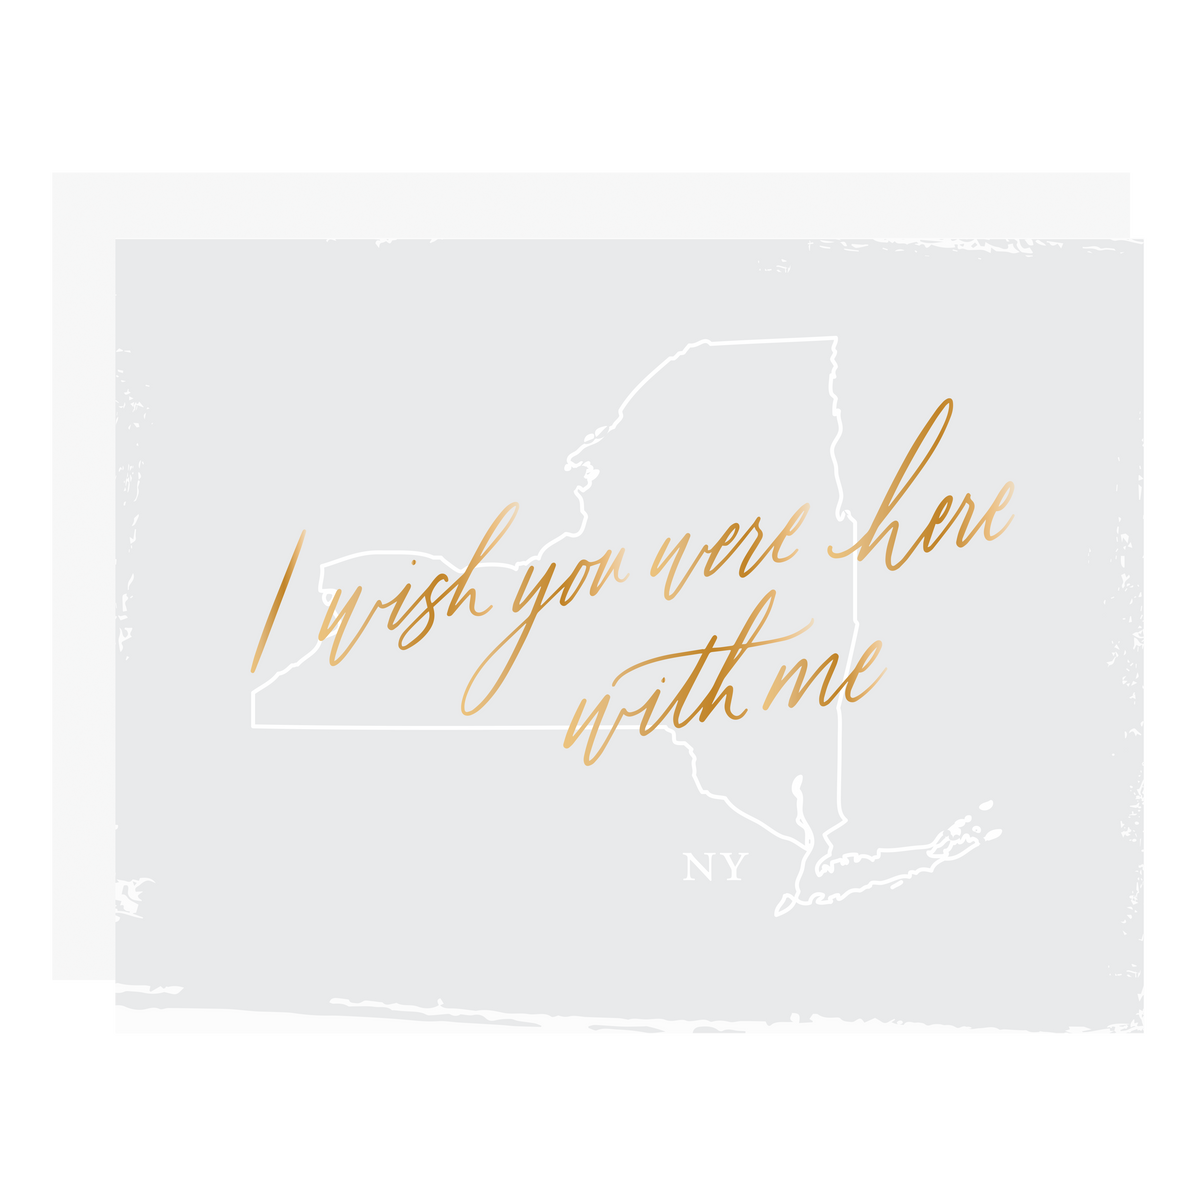 &quot;Wish You Were Here With Me - New York&quot;, letterpress printed by hand with gold foil. 